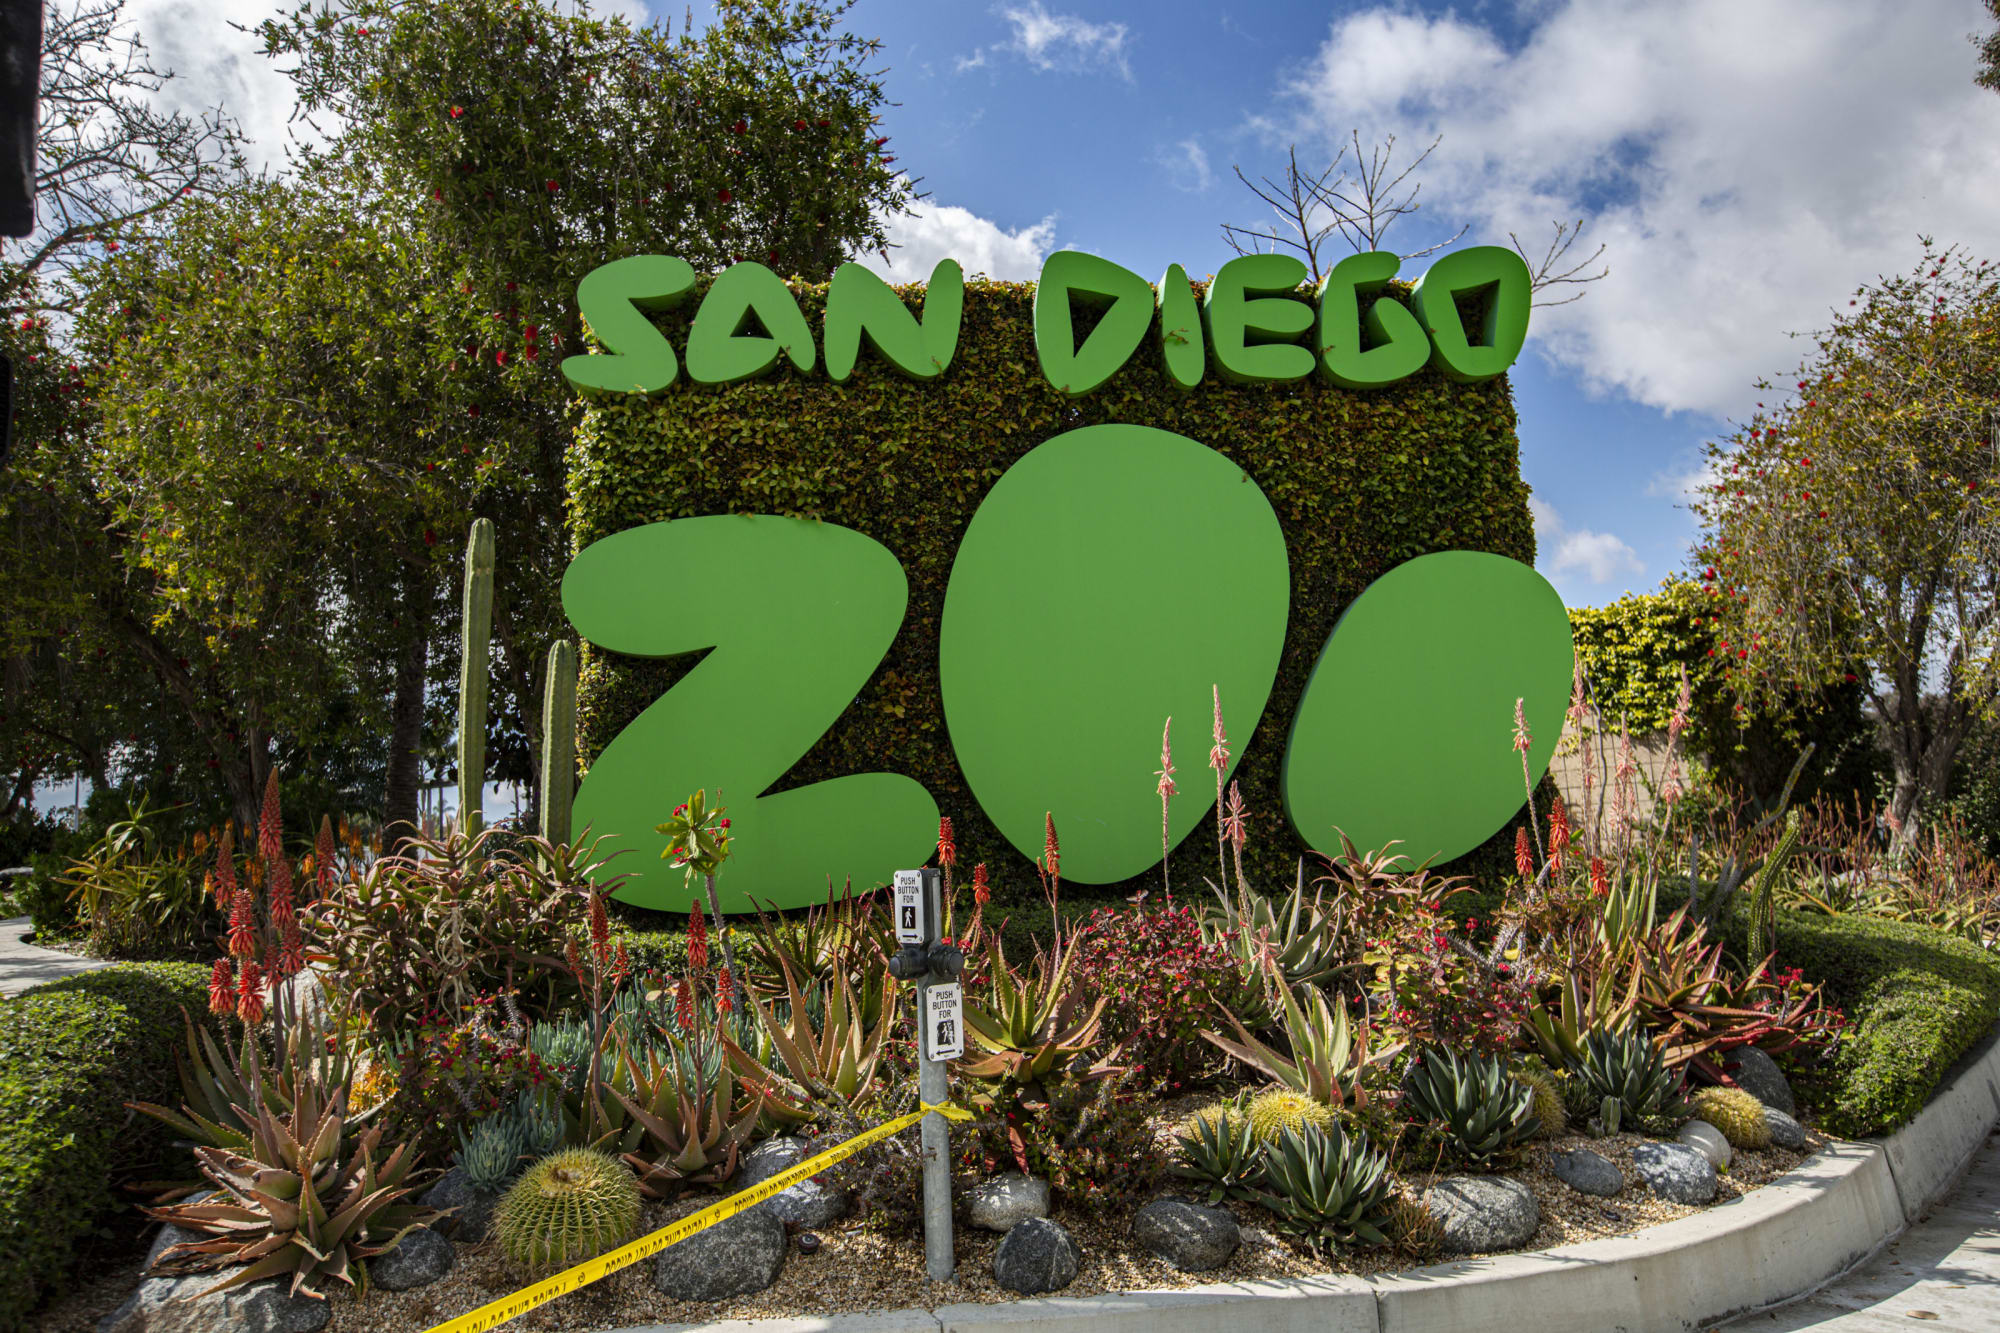 San Diego Zoo Possibly the biggest and best zoo experience in the US